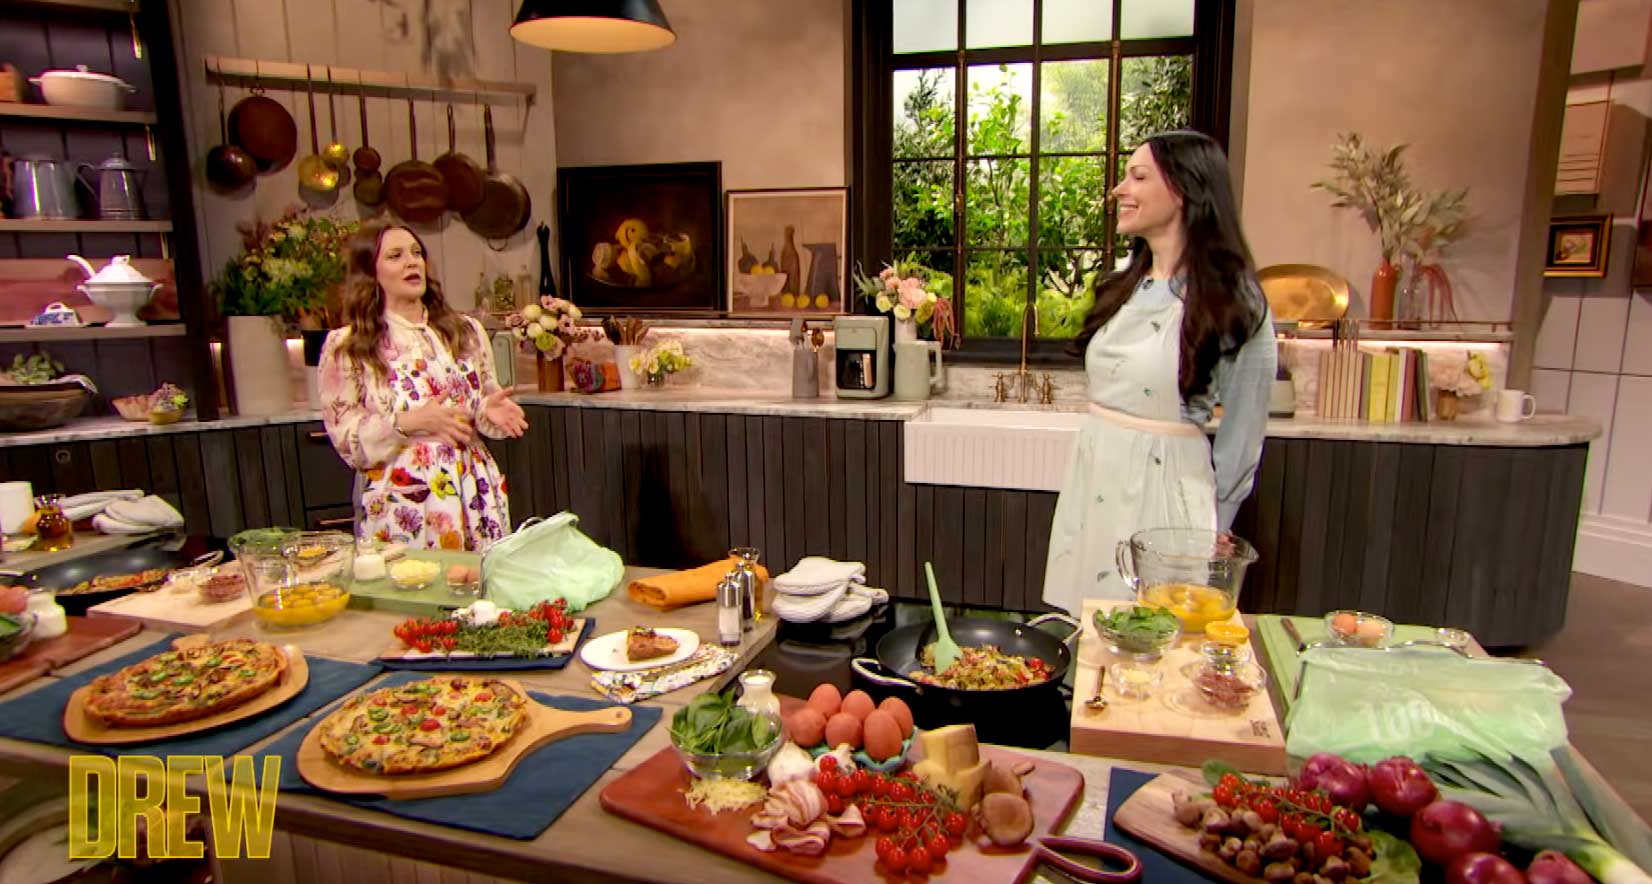 In the Kitchen with Drew Barrymore and Brunch with Babs - Laura Prepon